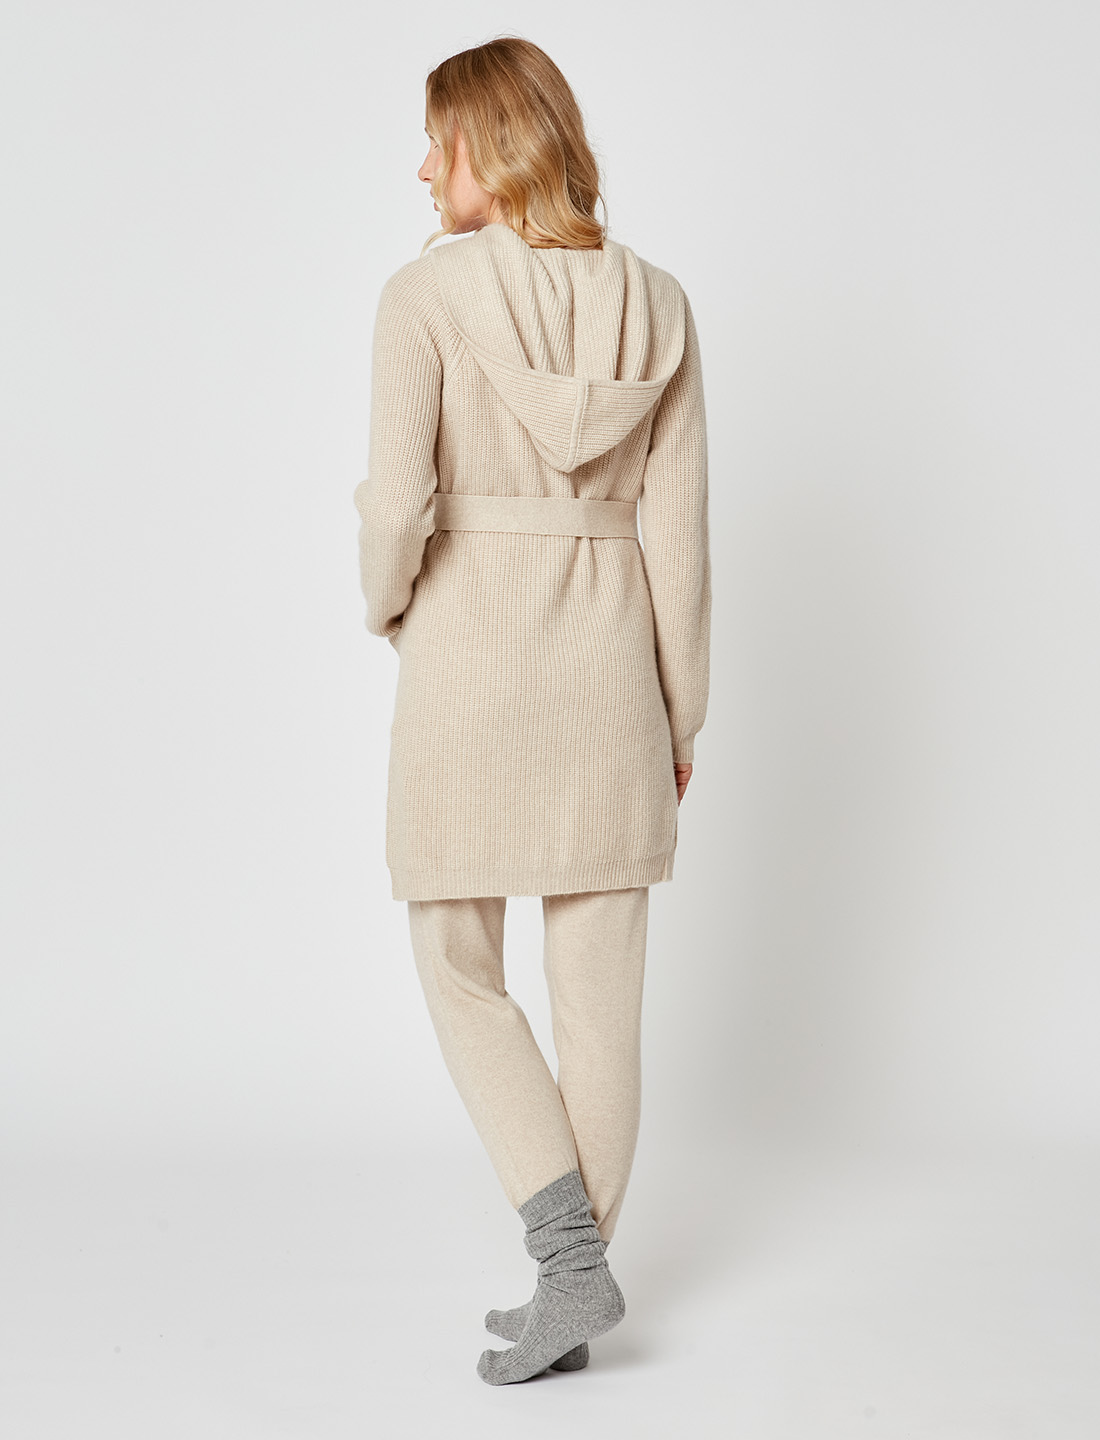 Cashmere bathrobe with shawl collar and soft hood in camel